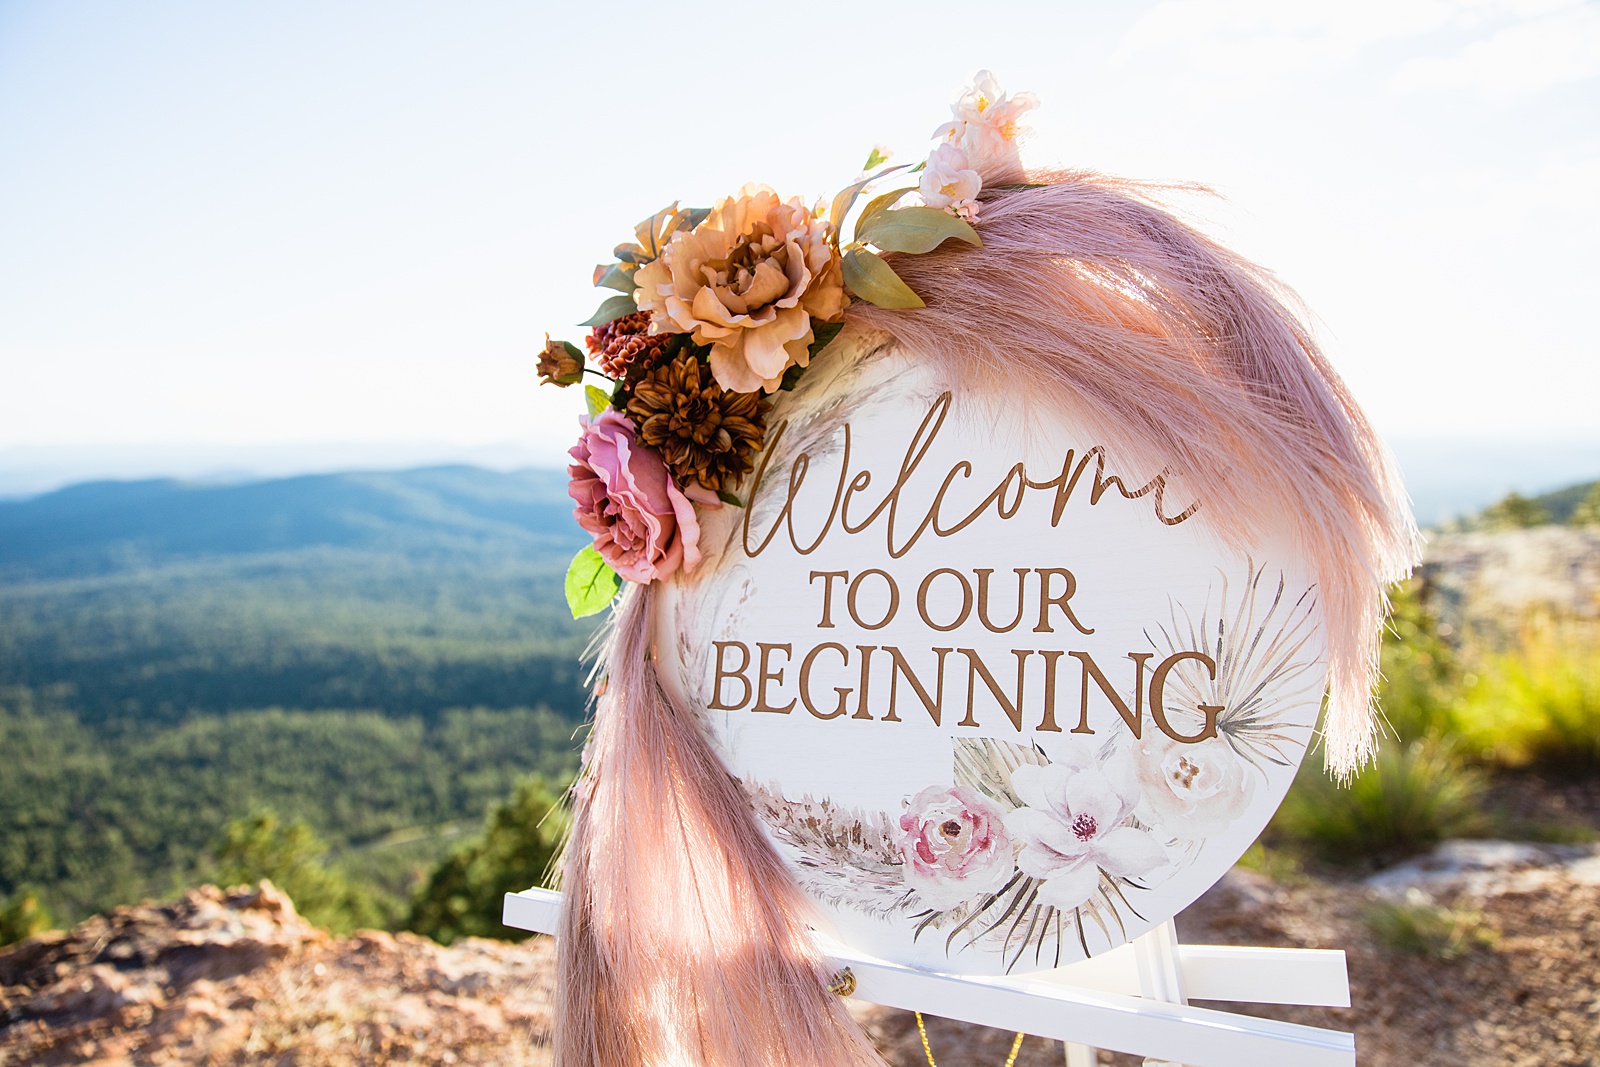 Welcome to our beginning sign at Wedding ceremony at Mogollon Rim by Arizona elopement photographer PMA Photography.